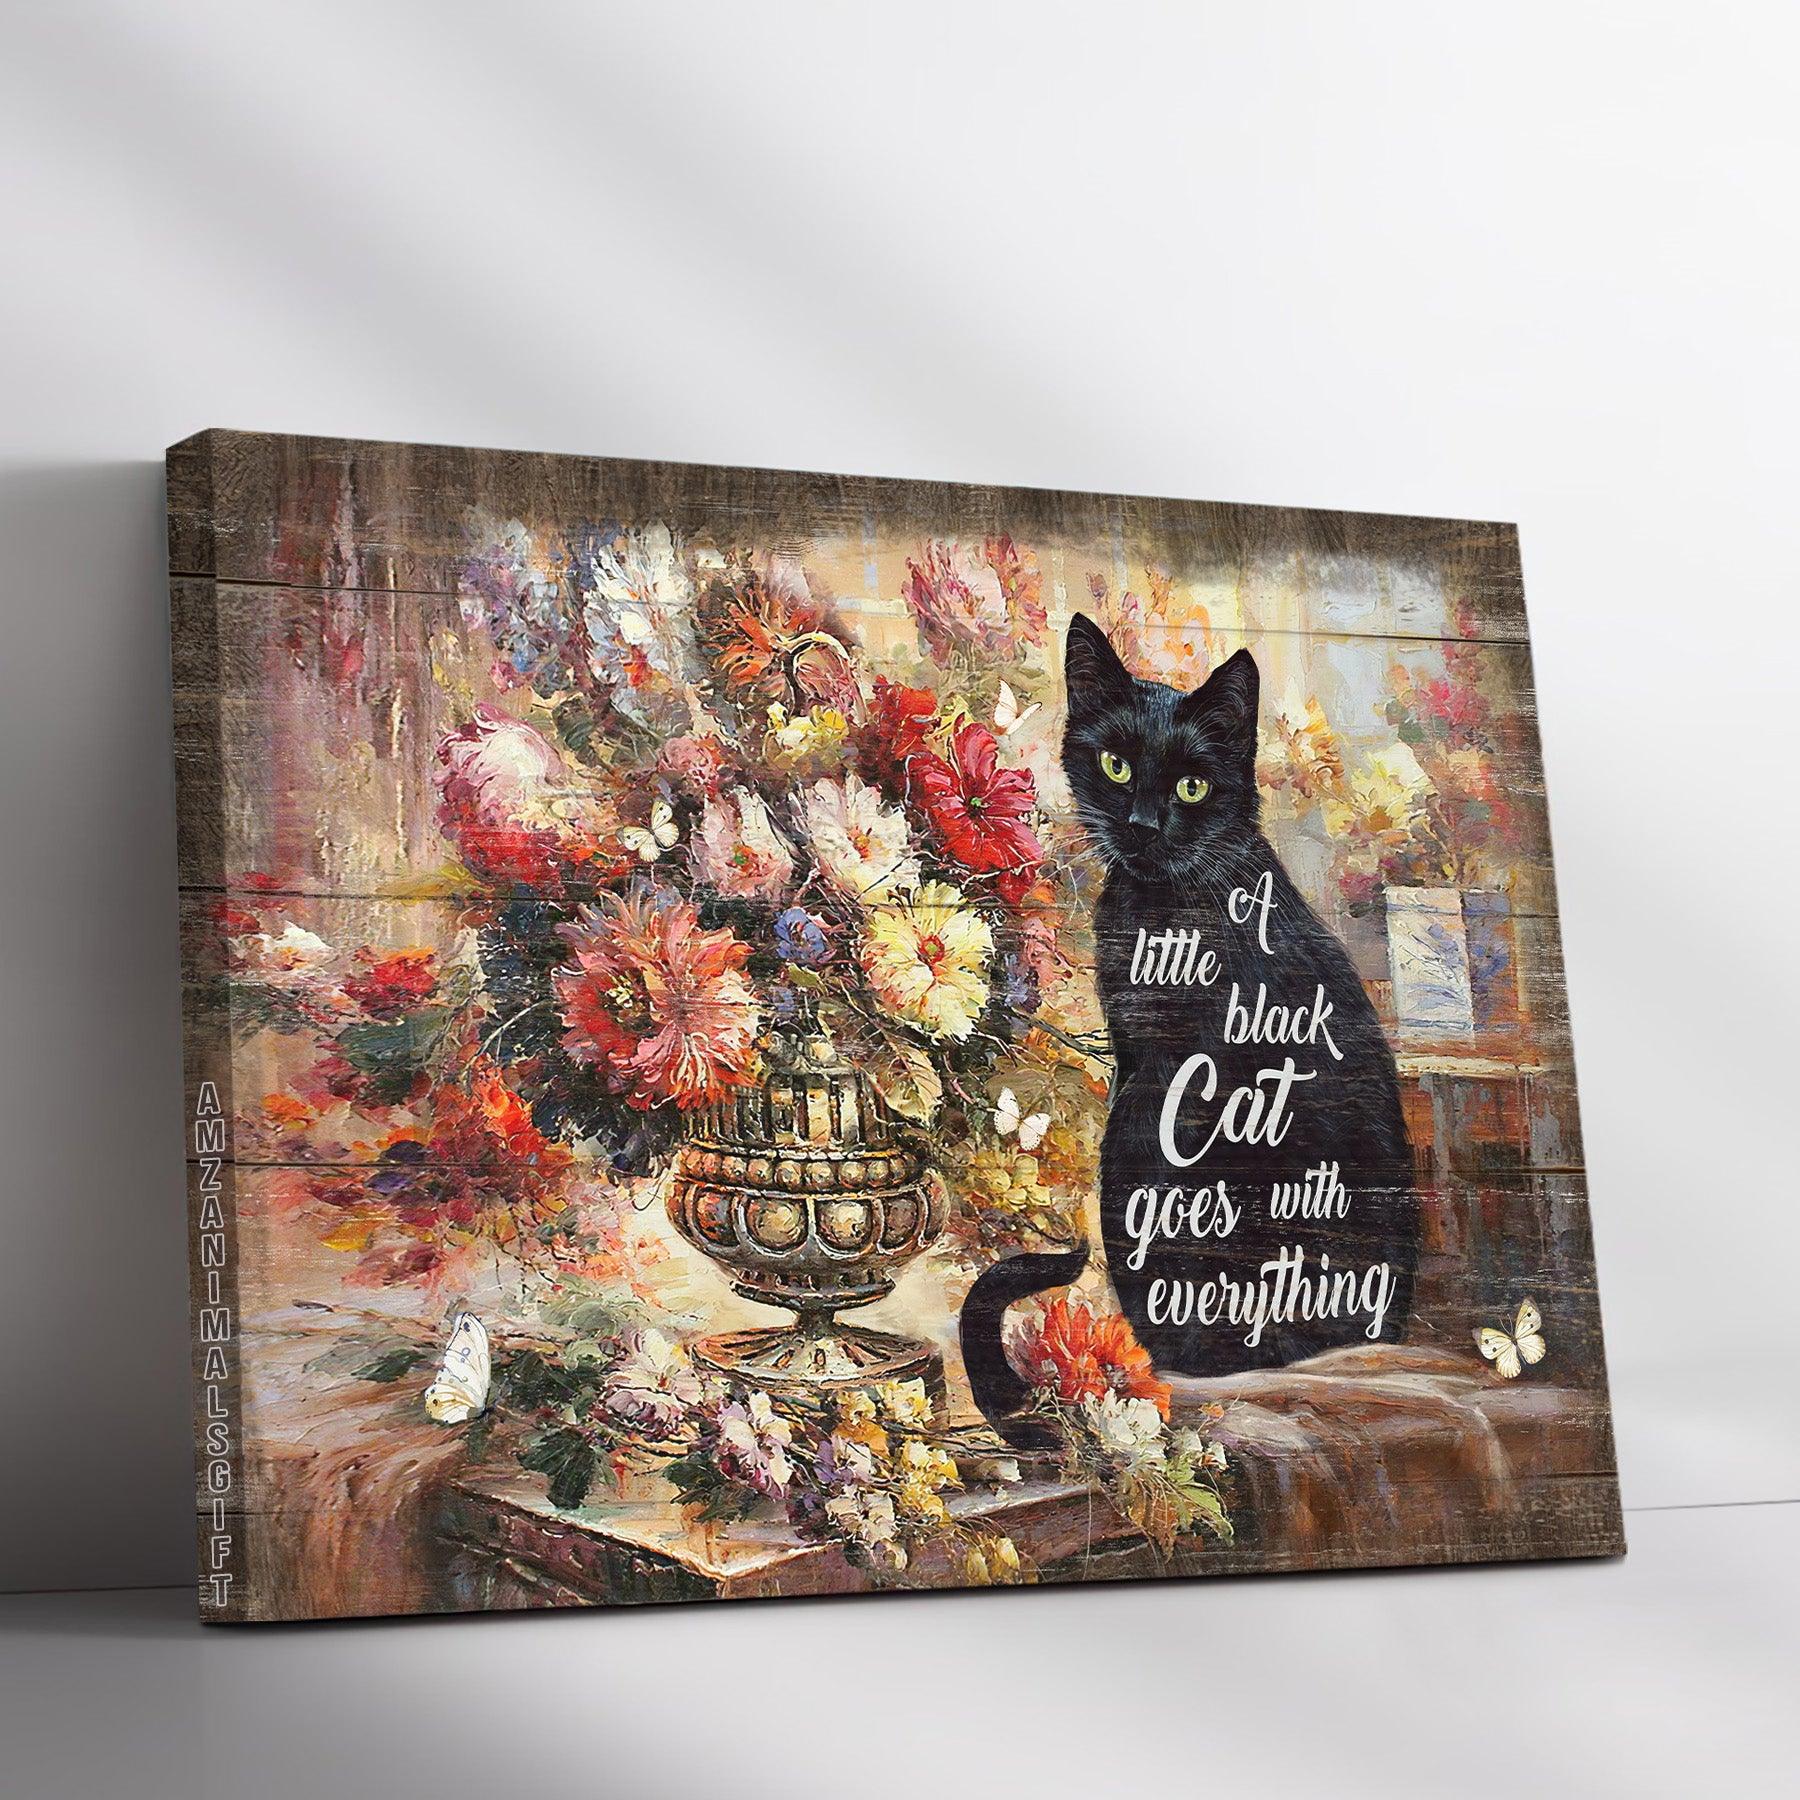 Black Cat & Jesus Premium Wrapped Landscape Canvas - Brilliant Flower Garden, Black Cat, A Little Black Cat Goes With Everything - Gift For Christian - Amzanimalsgift